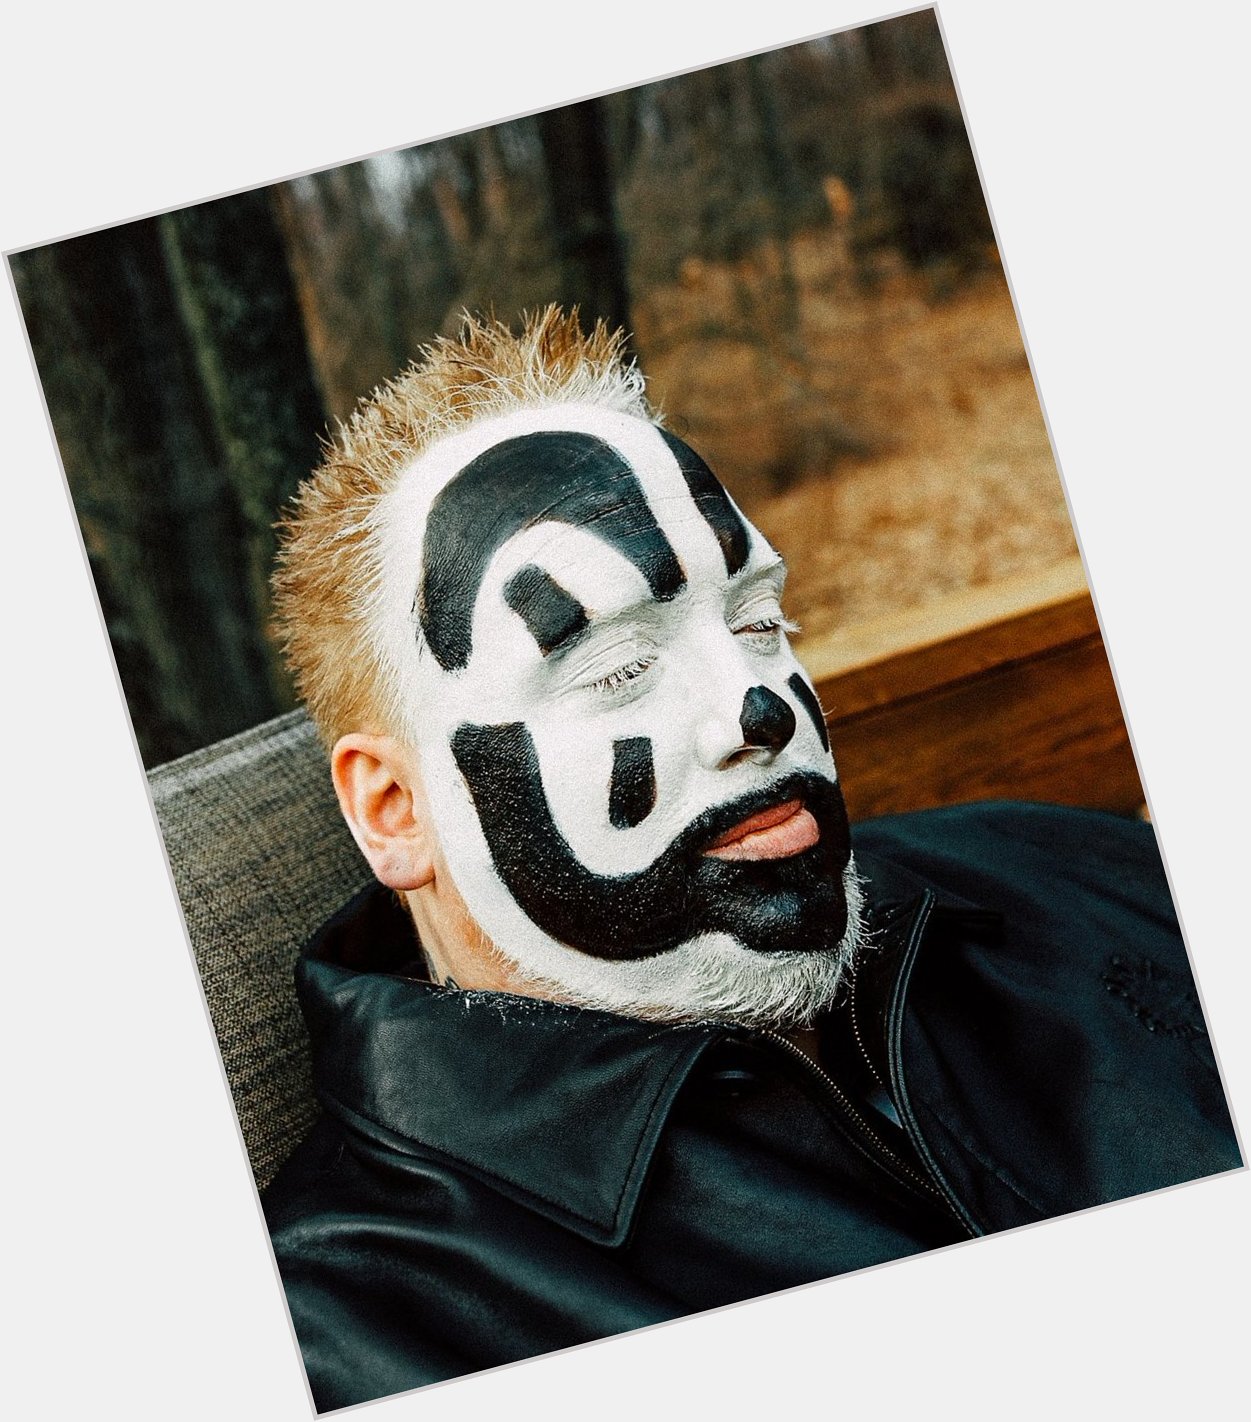  Happy Birthday to our big homie Violent J!!! We love ya and hope your next year is fresh as fuck! 